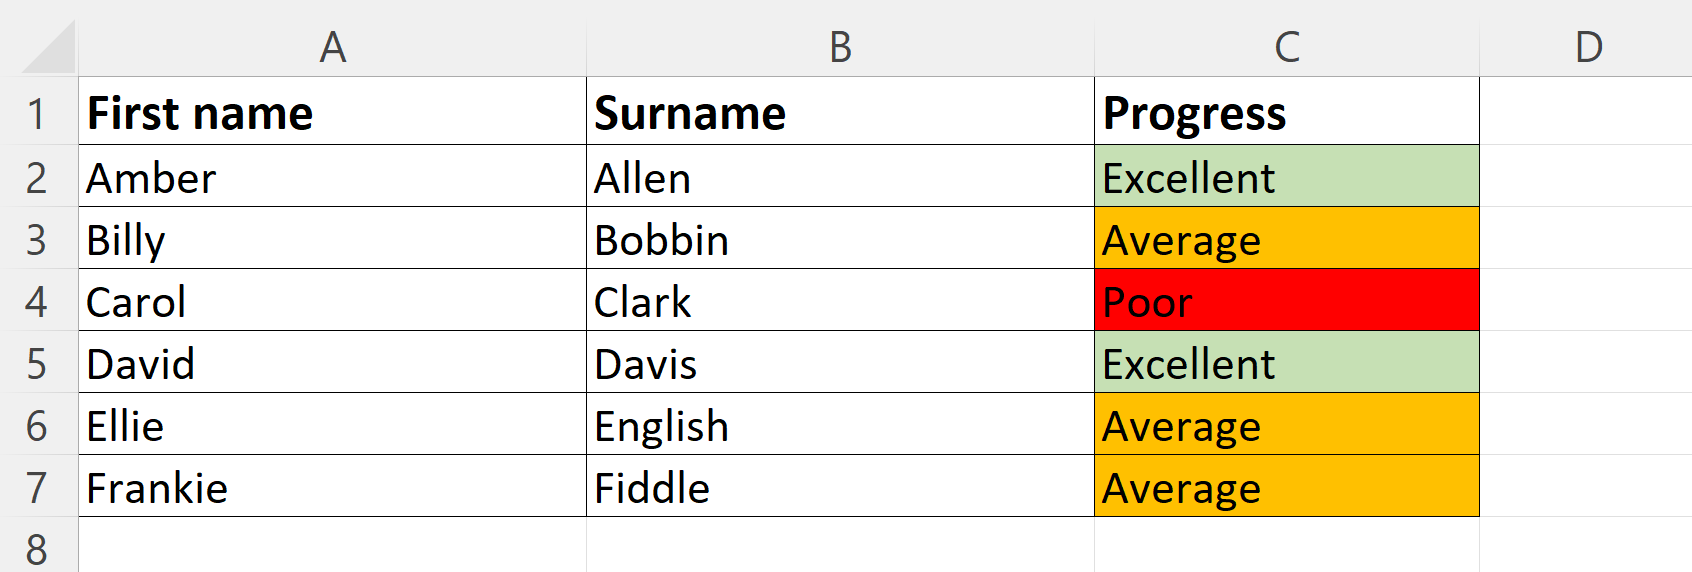 Excel spreadsheet with progress shown as red labelled poor, orange labelled average and green labelled excellent